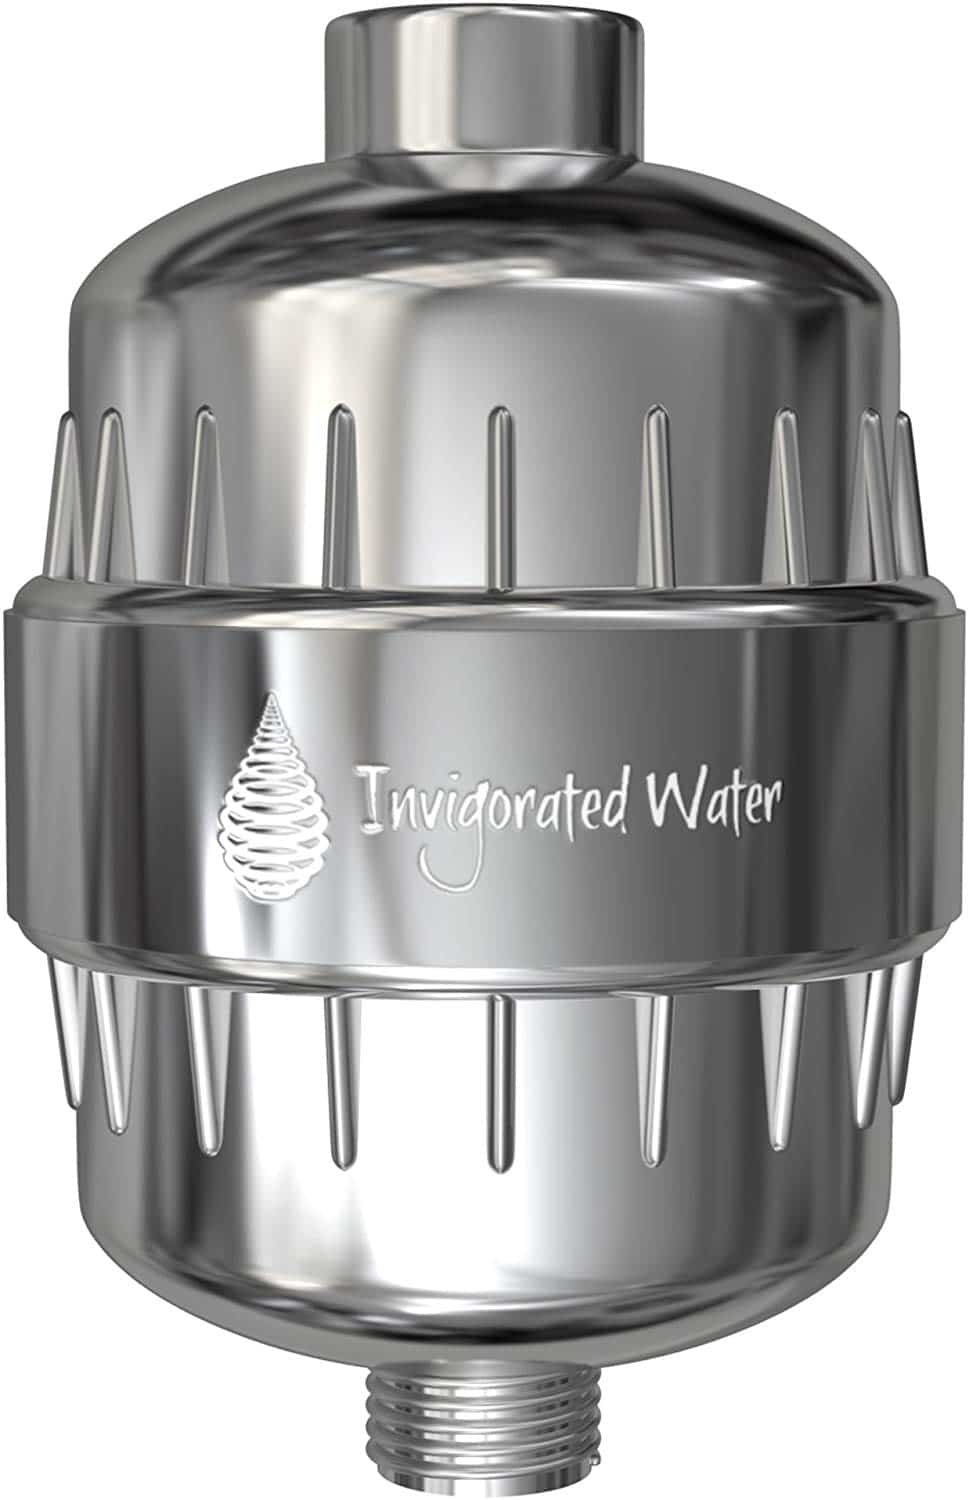 Invigorated Water pH Energize Shower Filter